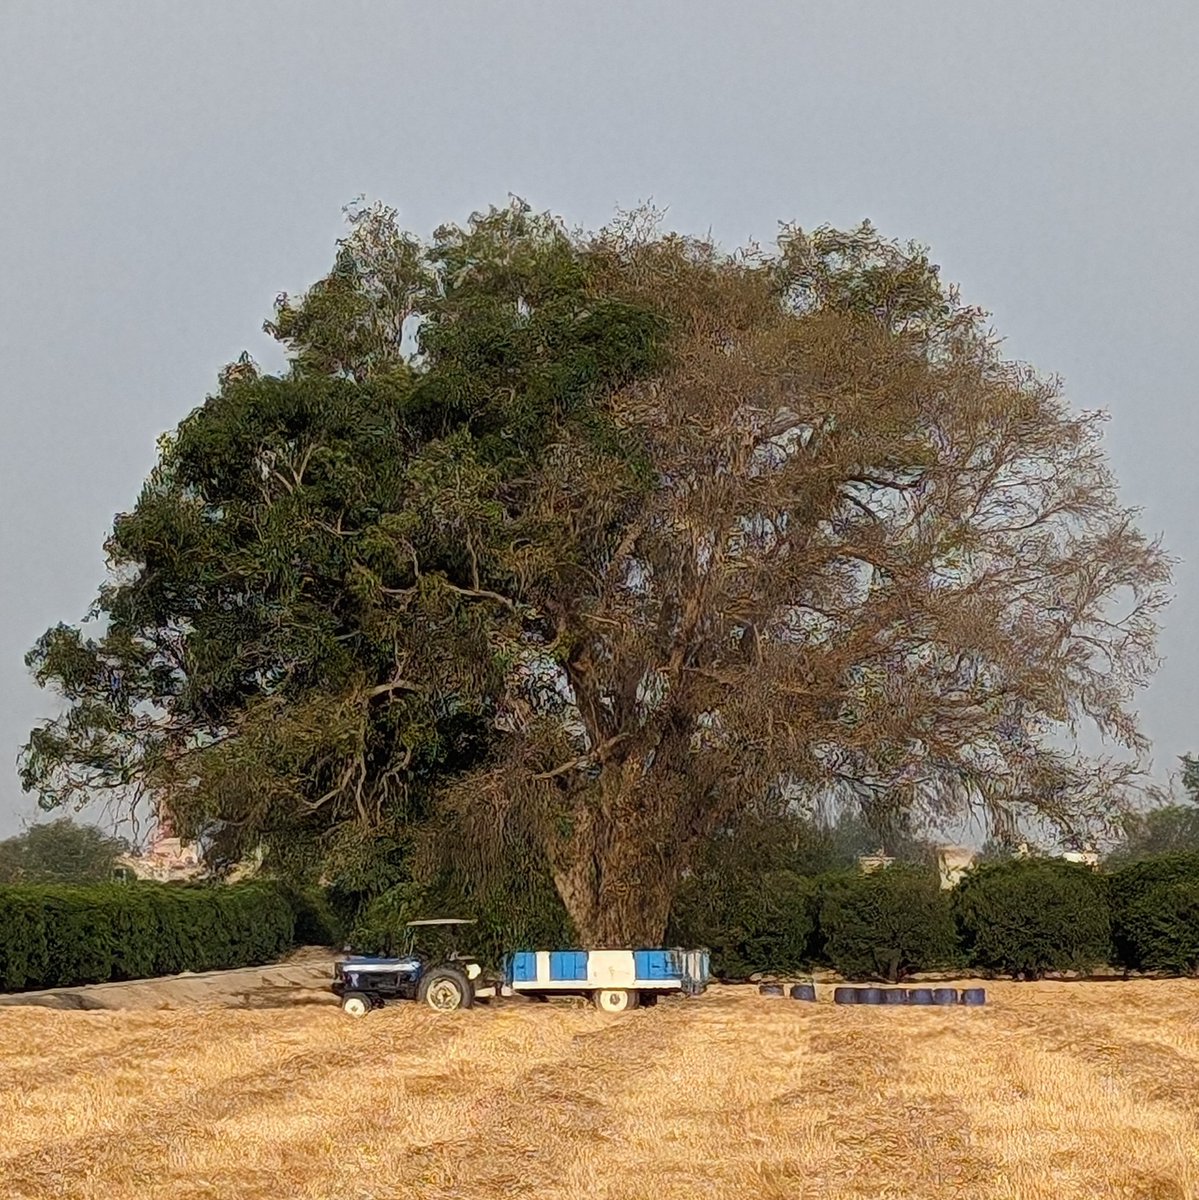 On my farm - half the Pipal tree is dead. It was probably this big even when my father was born. I have never seen such happen before. I pray the leaves sprout. Something is fundamentally changing & humanity is still not able to grasp the enormity of it all.